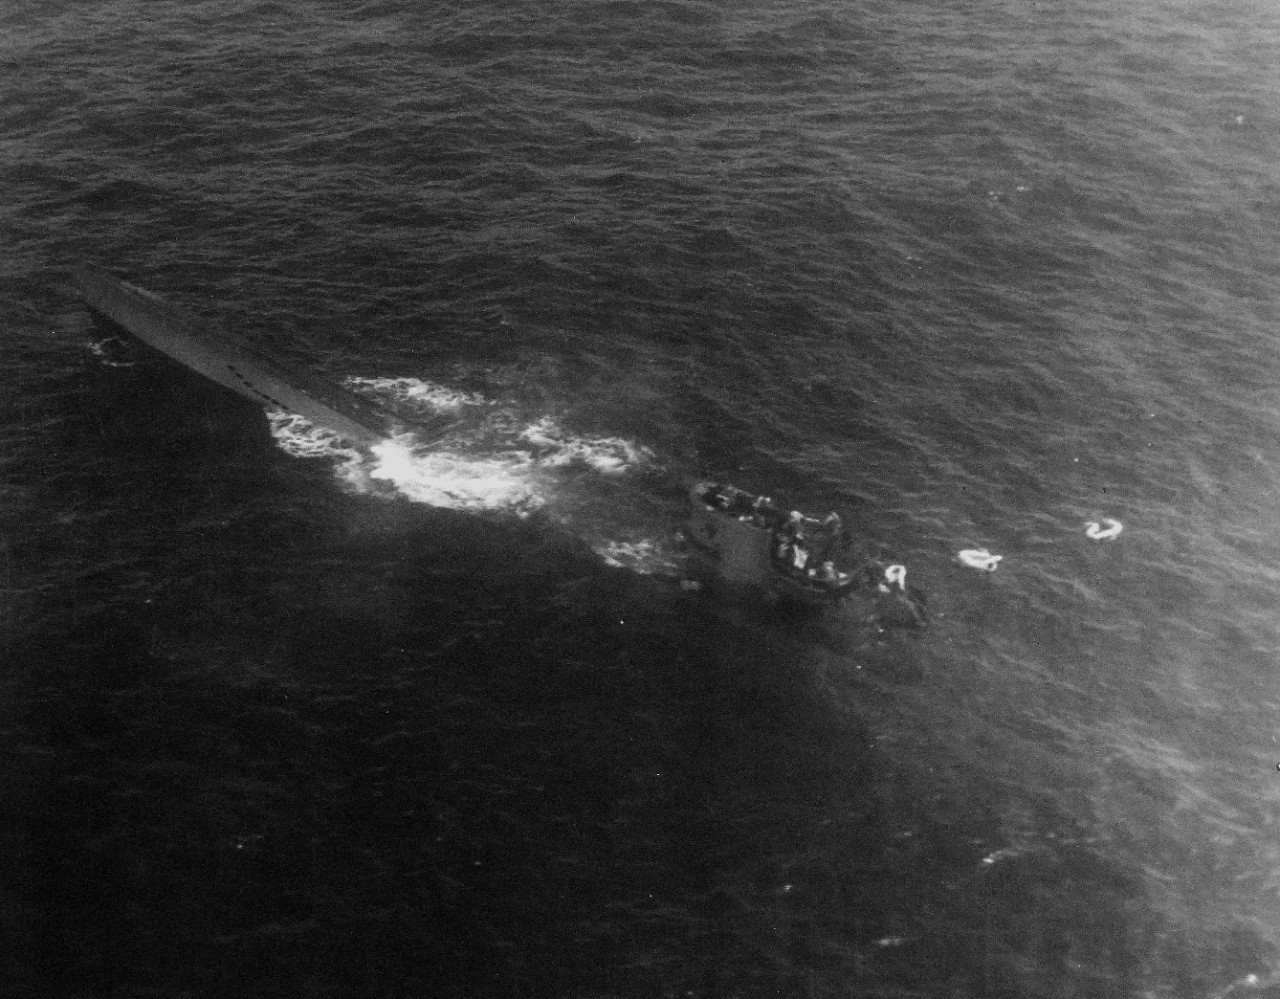 <p>80-G-79410: Air Attacks on German U-boats, WWII. German U-boat incident #3992, August 9, 1943. German submarine, U-664, sinking after an attack by Lieutenant Junior Grade G.G. Hogan, USNR. Forty-four survivors were picked up and taken on board USS Card (CVE-11). This view was taken by another aircraft during the attack, piloted by Lieutenant Junior Grade C.G. Hewitt, USNR.&nbsp;</p>
